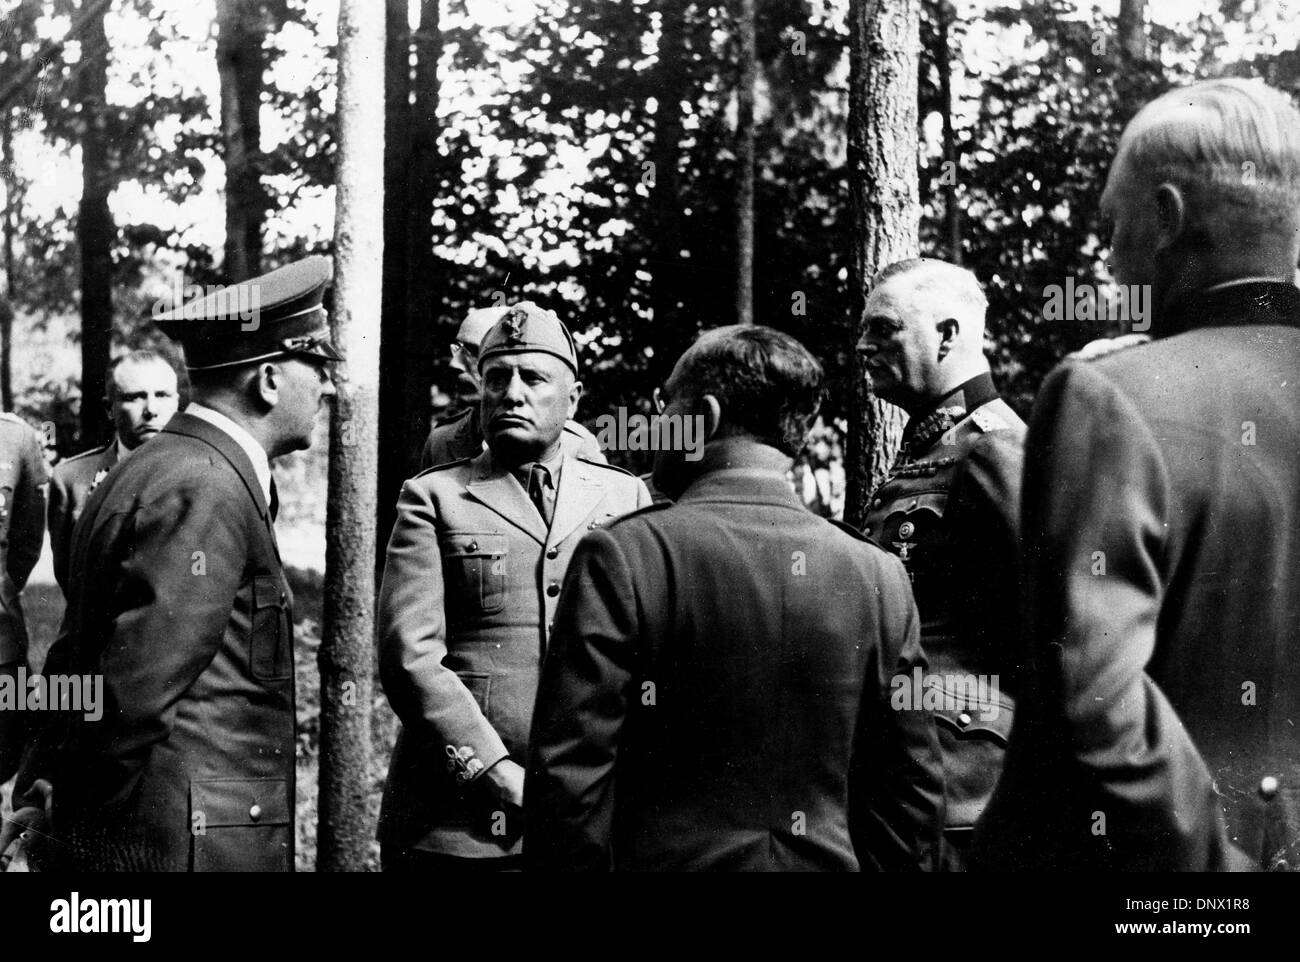 March 13, 1933 - Rome, Italy - BENITO MUSSOLINI (1883-1945) the Italian dictator and leader of the Fascist movement meets his boss, ADOLF HITLER on the Eastern front. (Credit Image: © KEYSTONE Pictures USA/ZUMAPRESS.com) Stock Photo